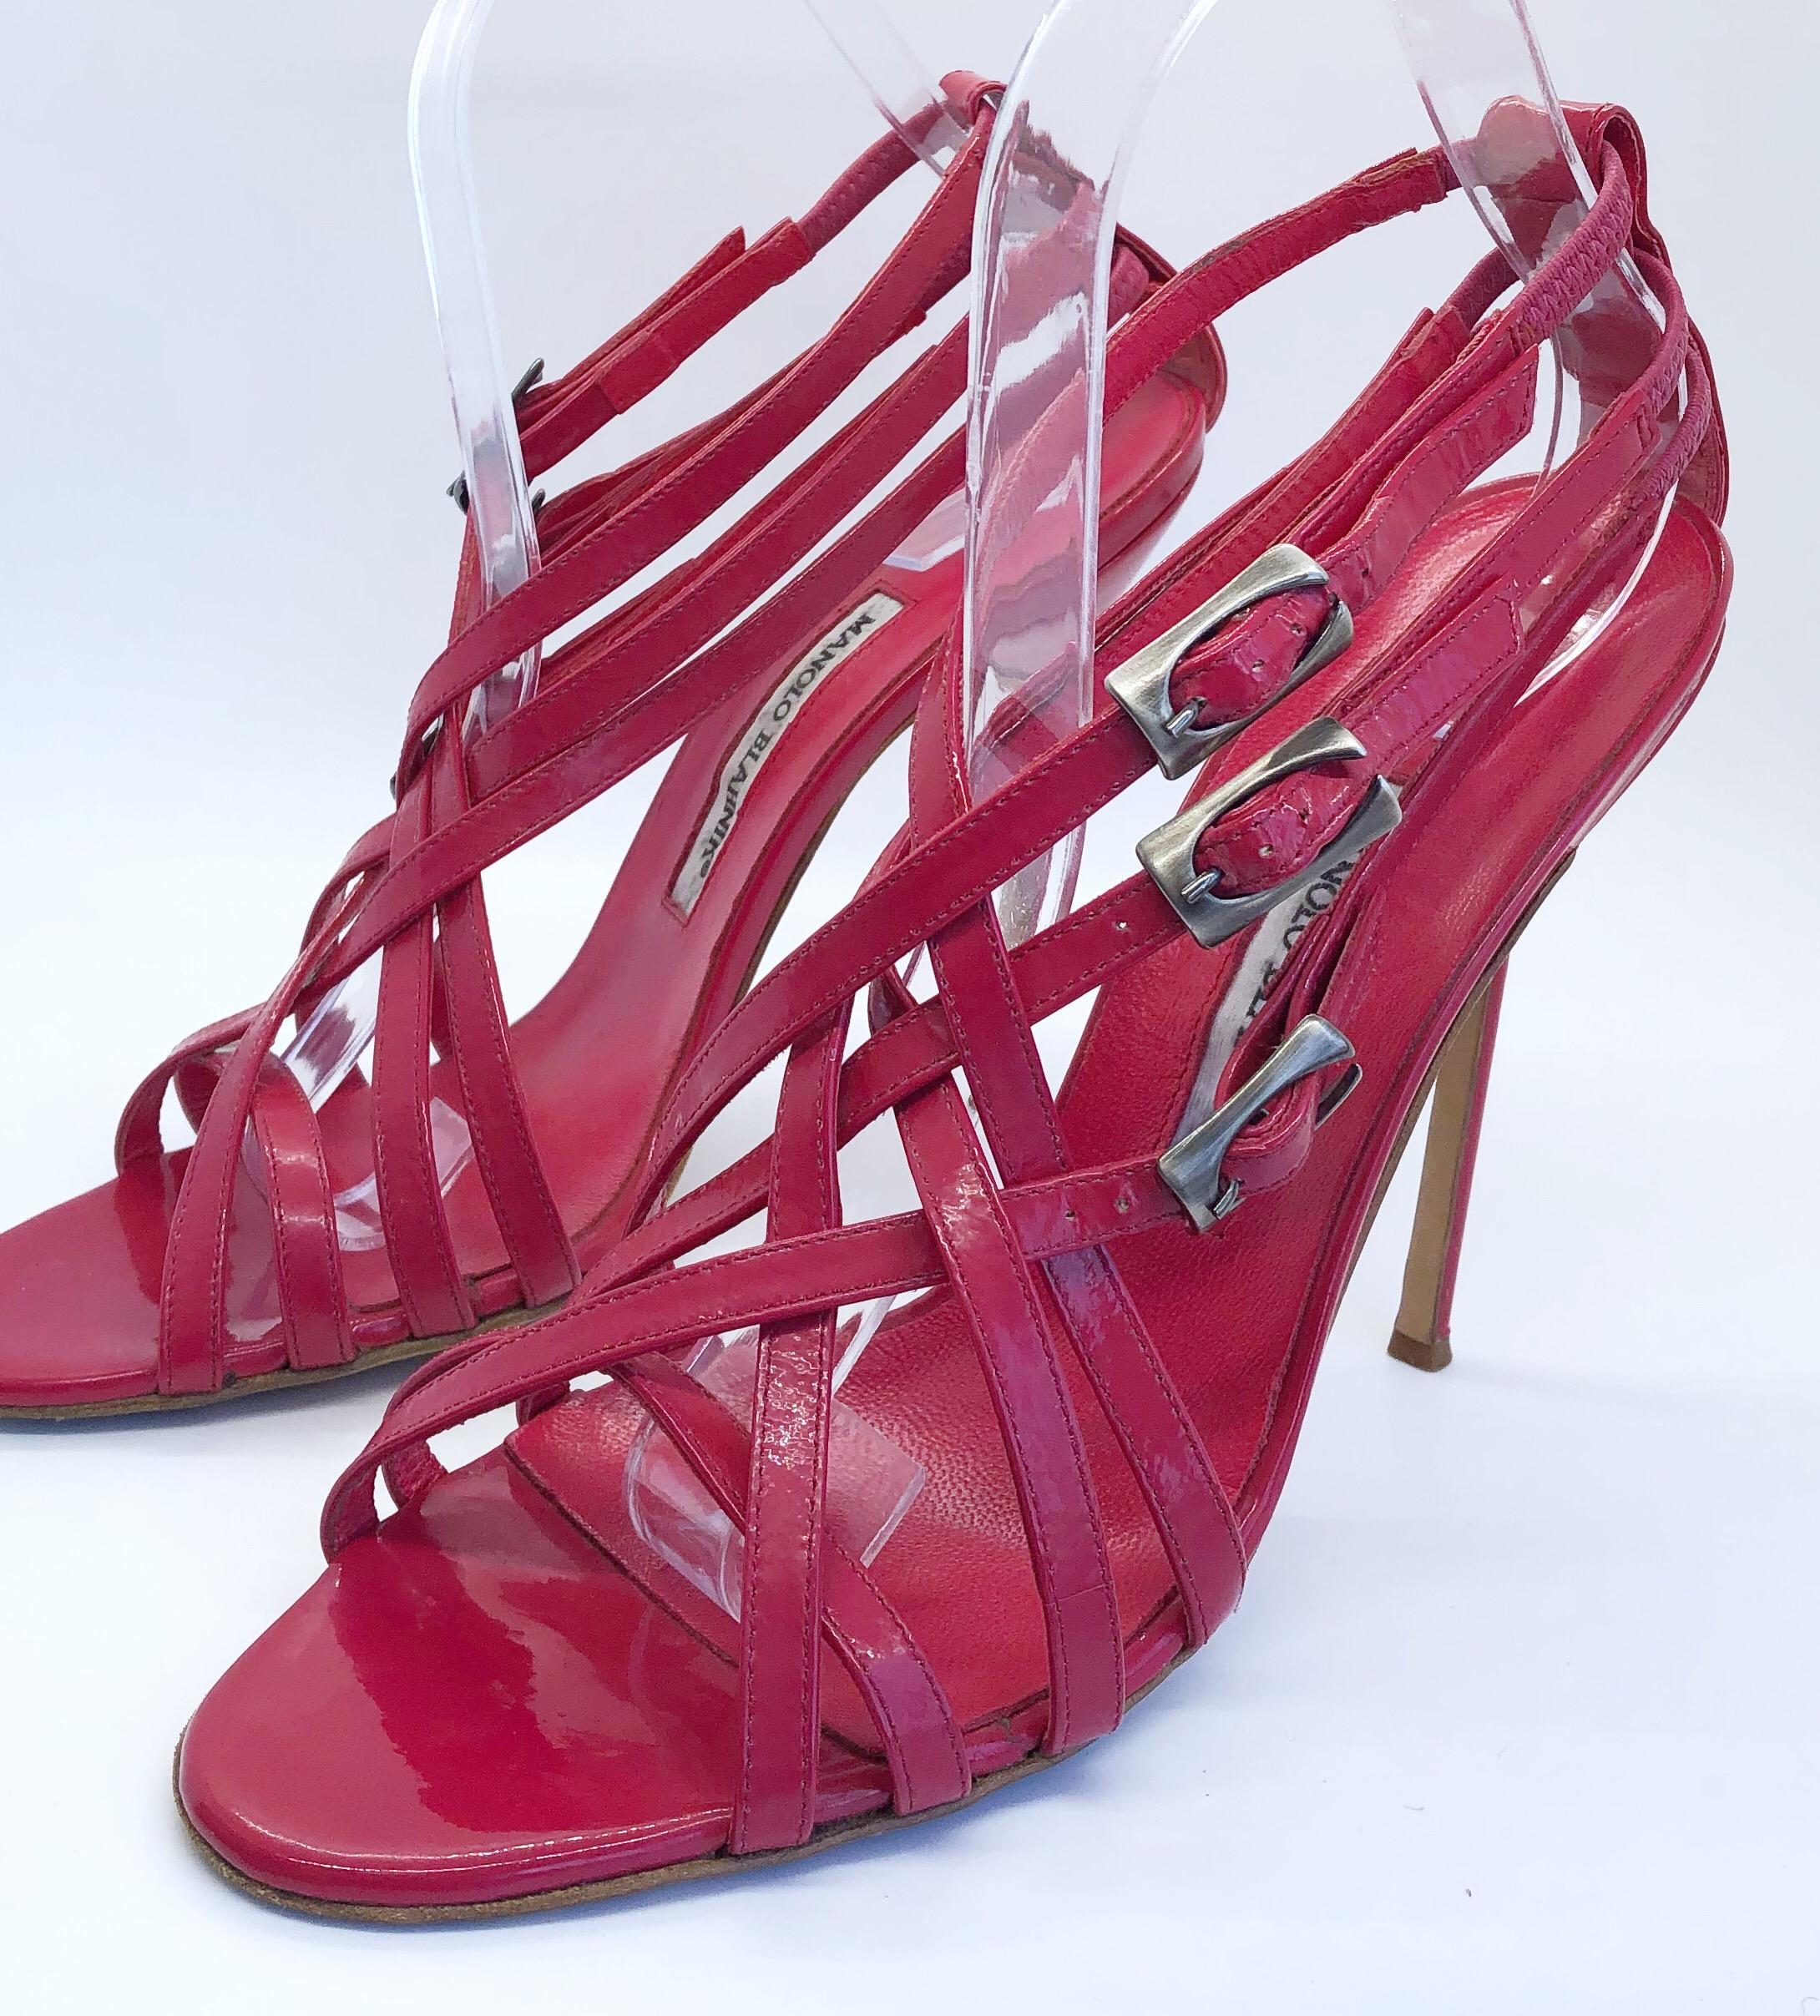 Beautiful MANOLO BLAHNIK raspberry pink patent leather strappy high heels in hard to find Size 41 / US 11 ! Features three adjustable straps with silver / nickel hardware. Leather soles. Worn once. Can easily be dressed up or down. Great with jeans,